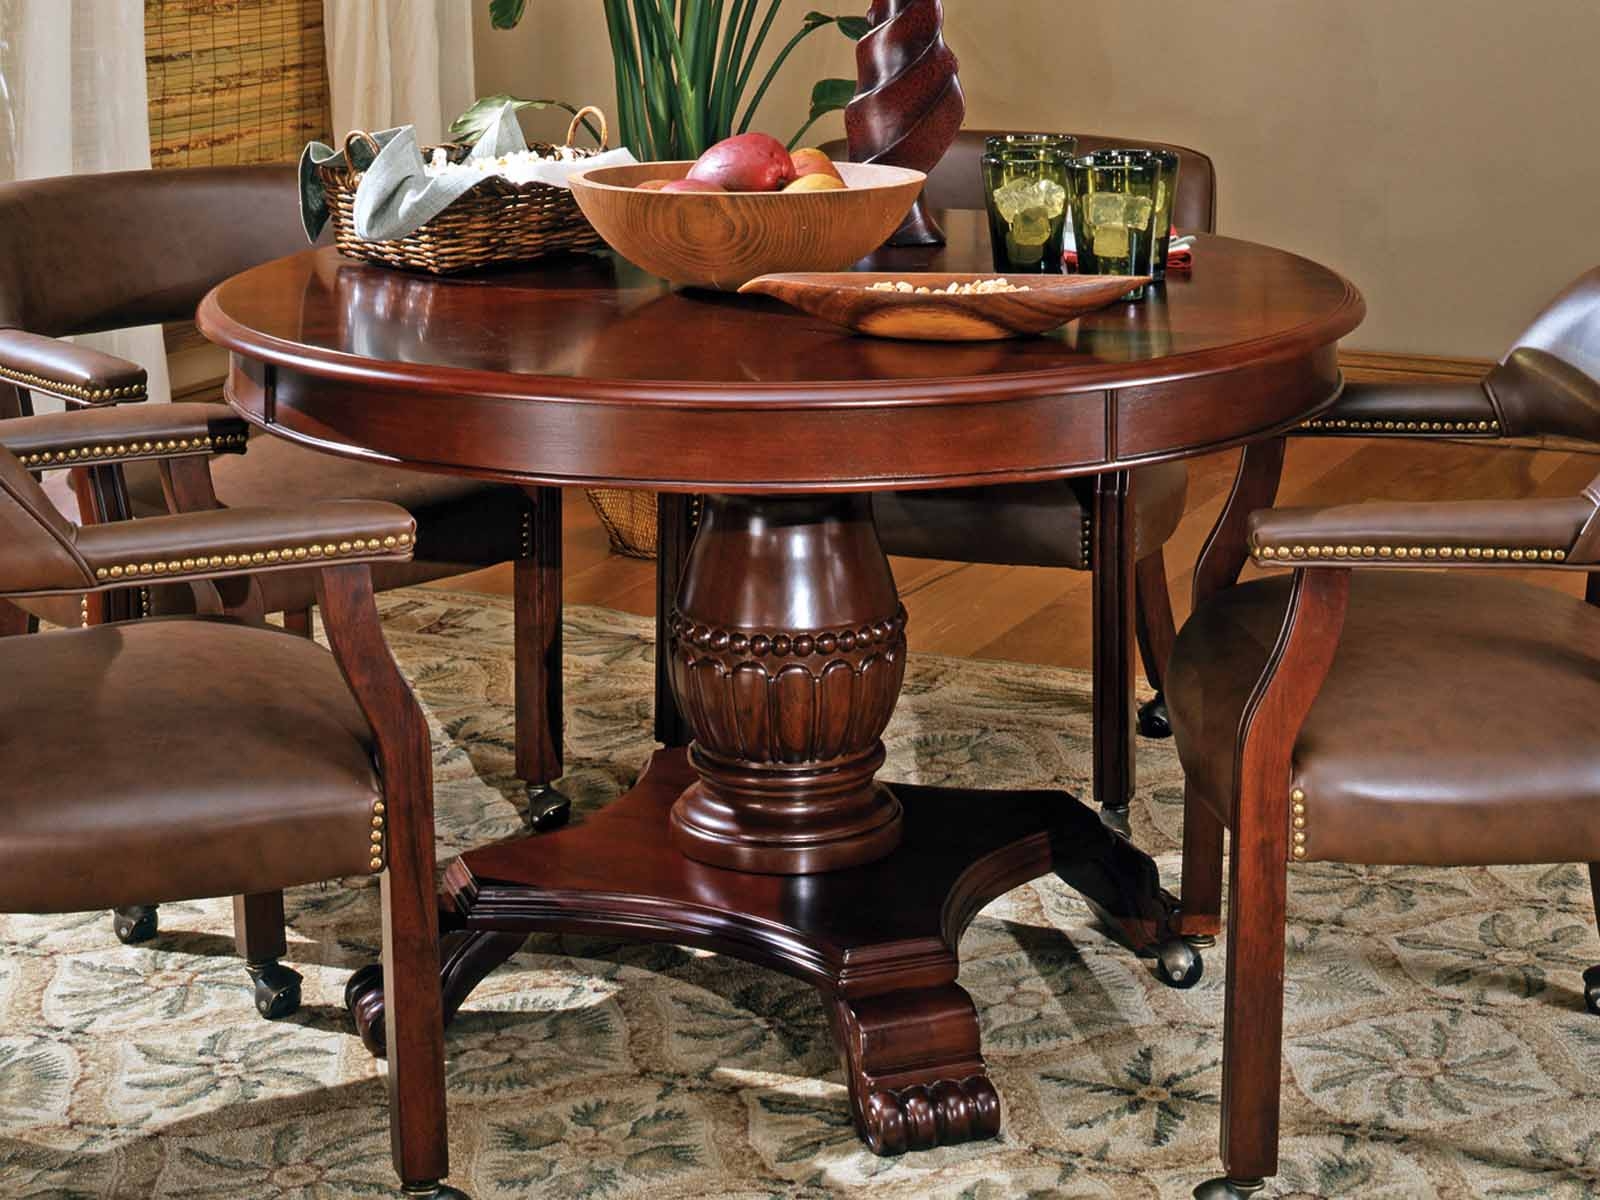 Tournament 50 inch round game table in rich cherry on